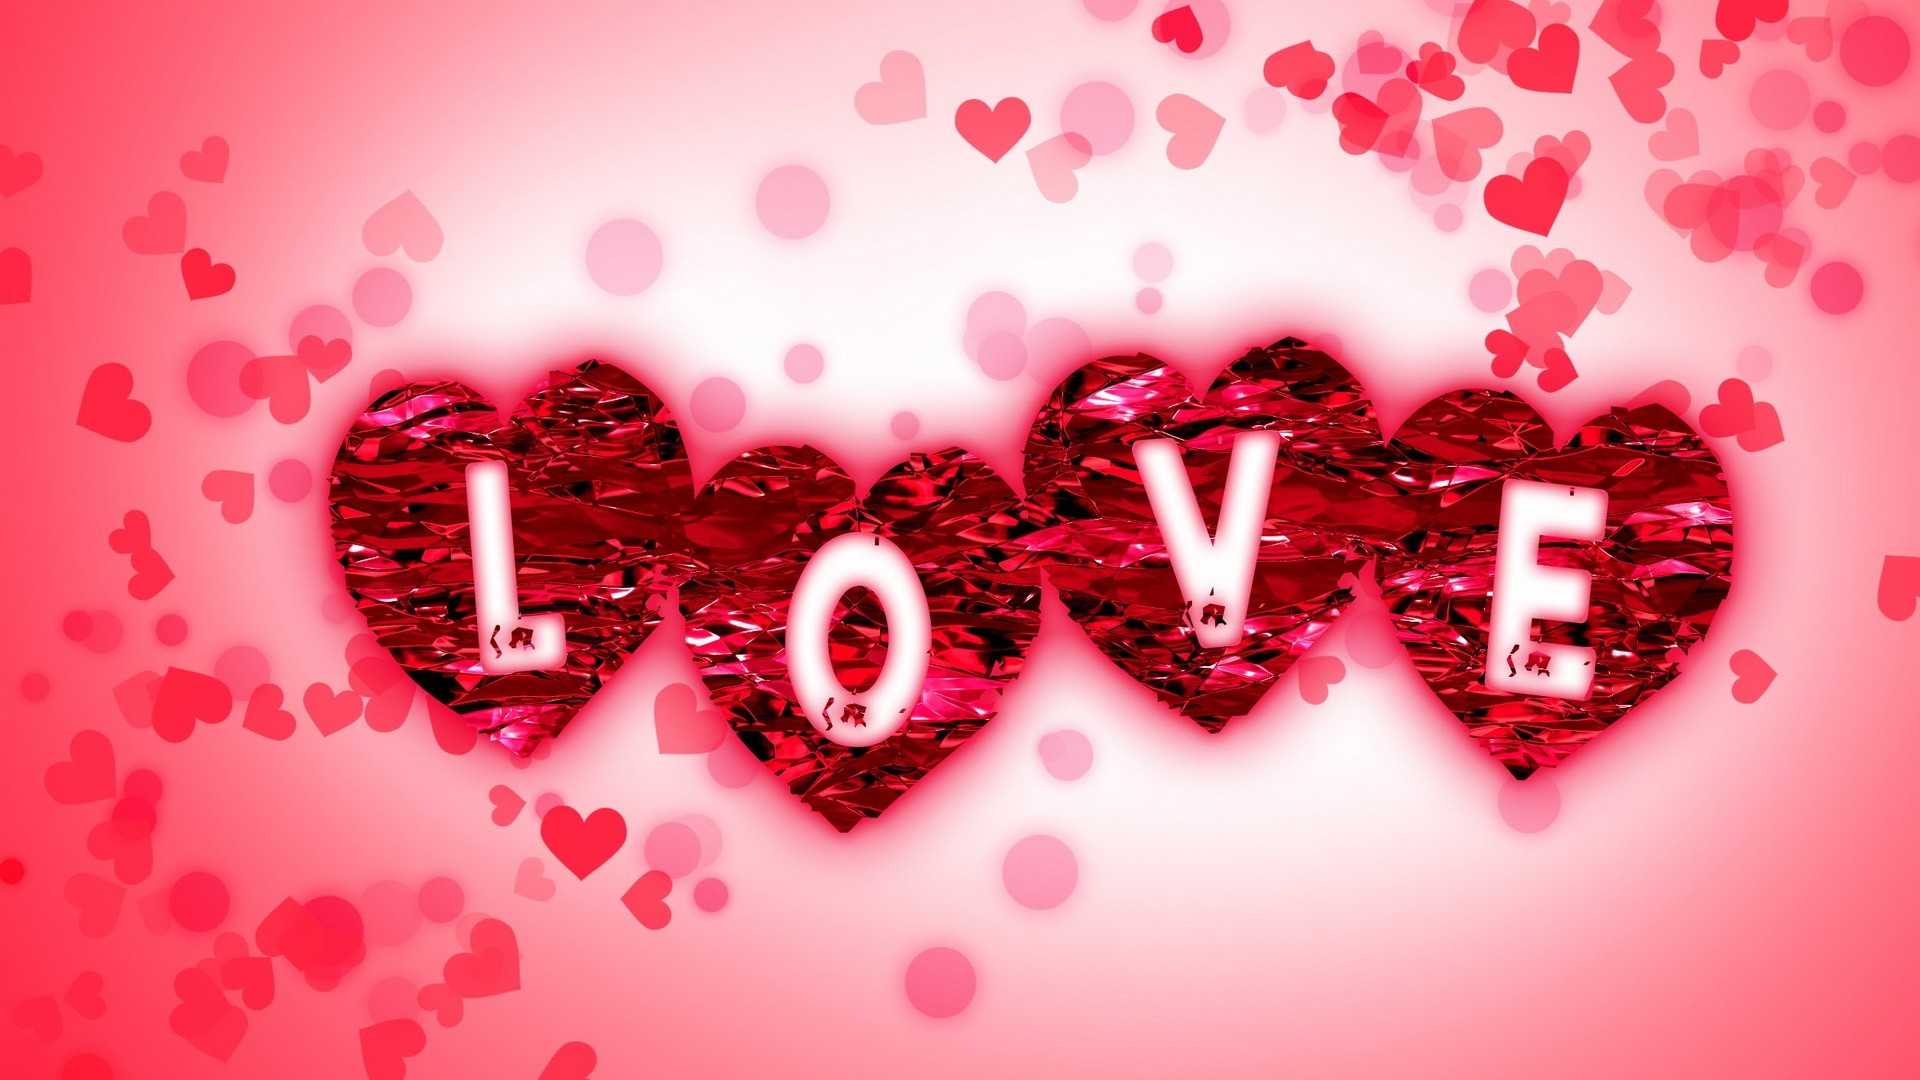 1920x1080 Cute Love Photos Image Wallpaper of love image download 24 by WS